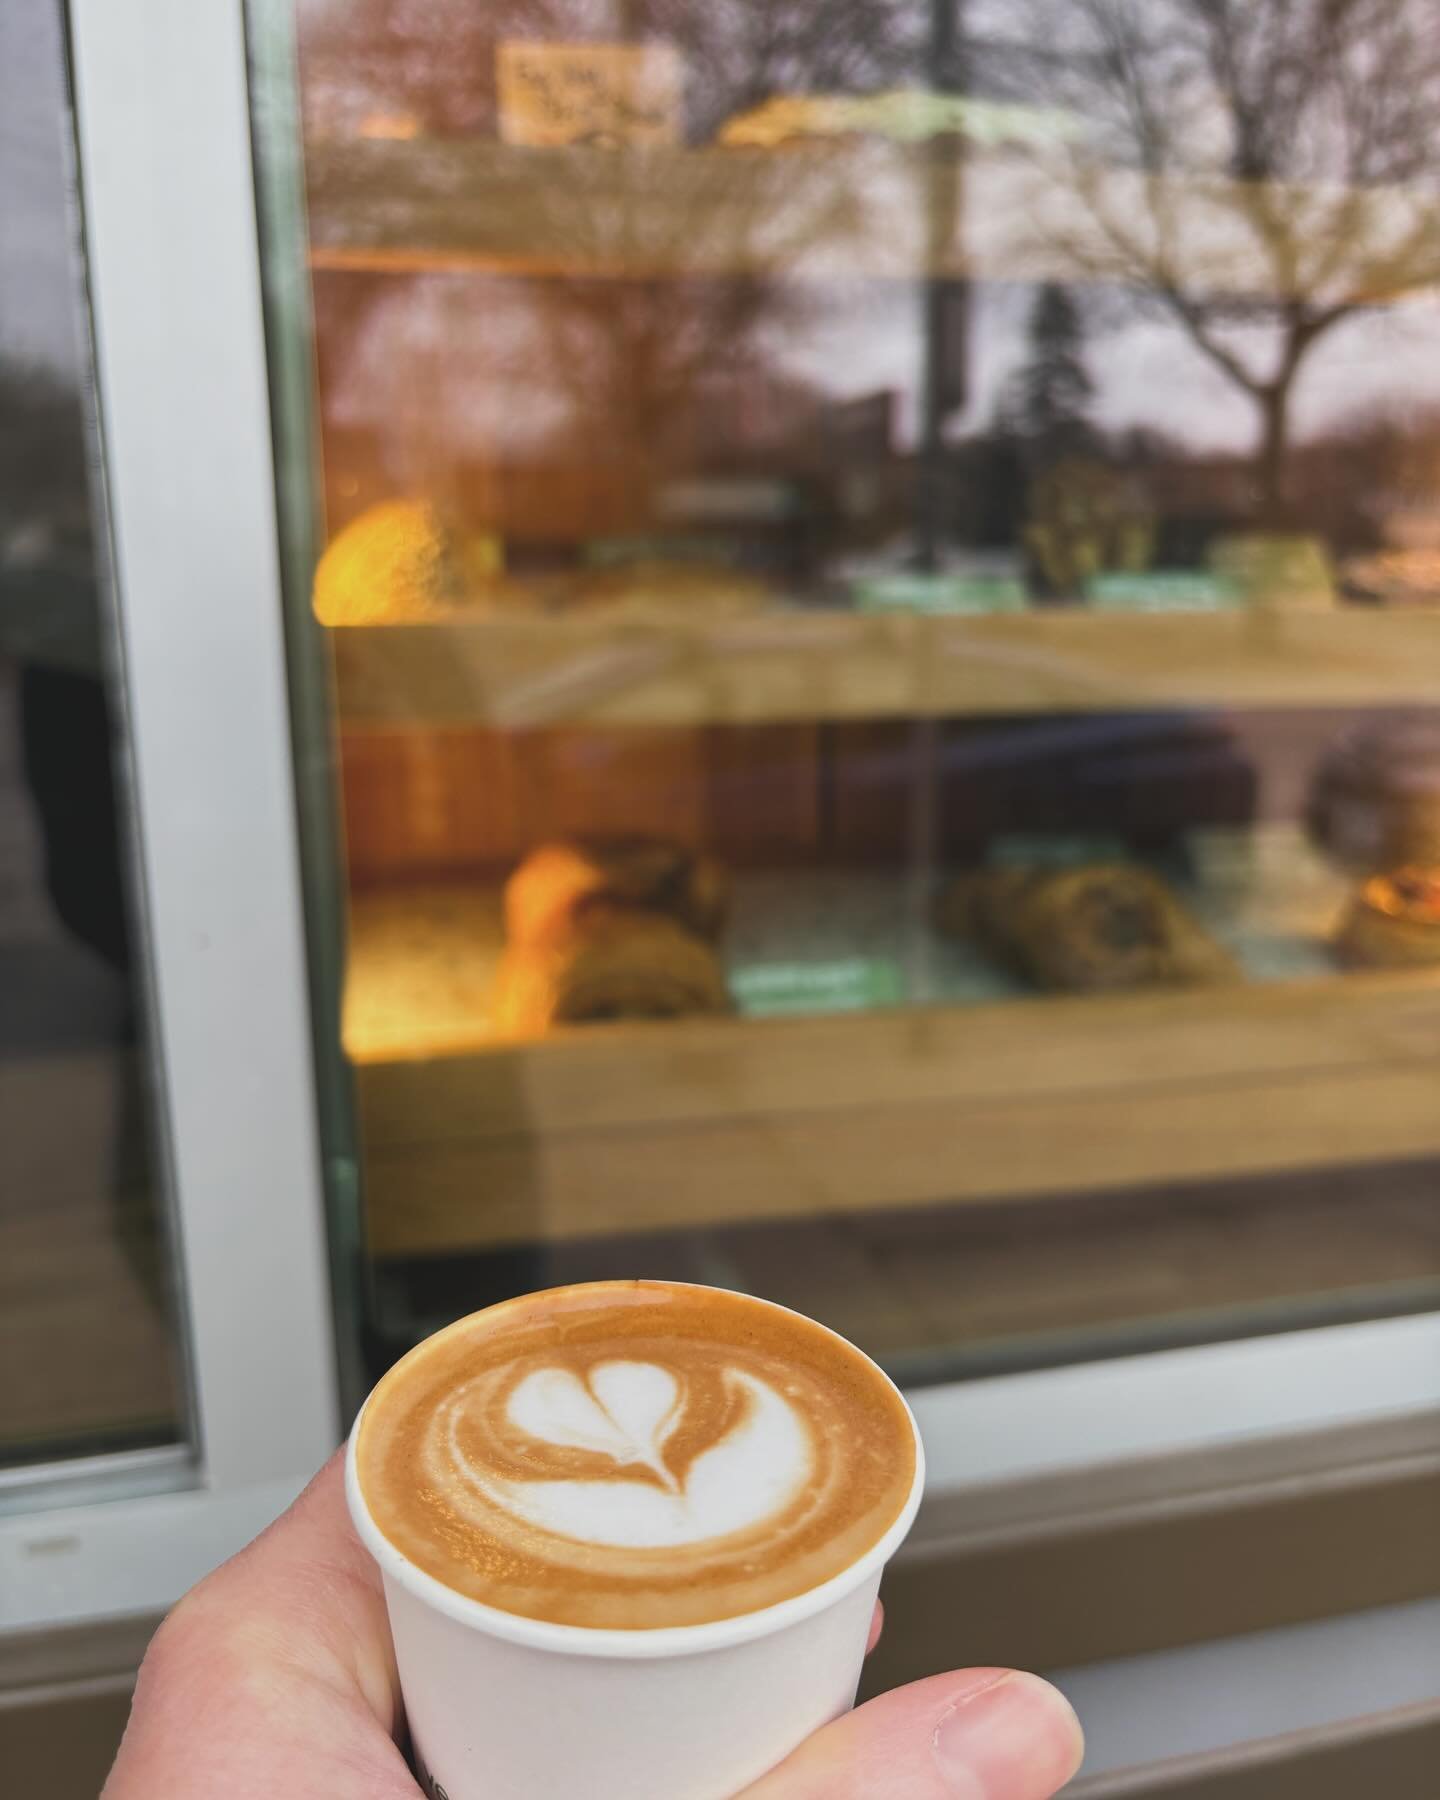 Cute little 4oz con leche is contemplating the pastry options in @vikingsandgoddesses walk up window display. 🤩 Stop by and find your perfect pairing. 🥐☕️ We&rsquo;re open Friday 7-12 (pastries start at 8!) and Sunday 8-12. If you want to order bea